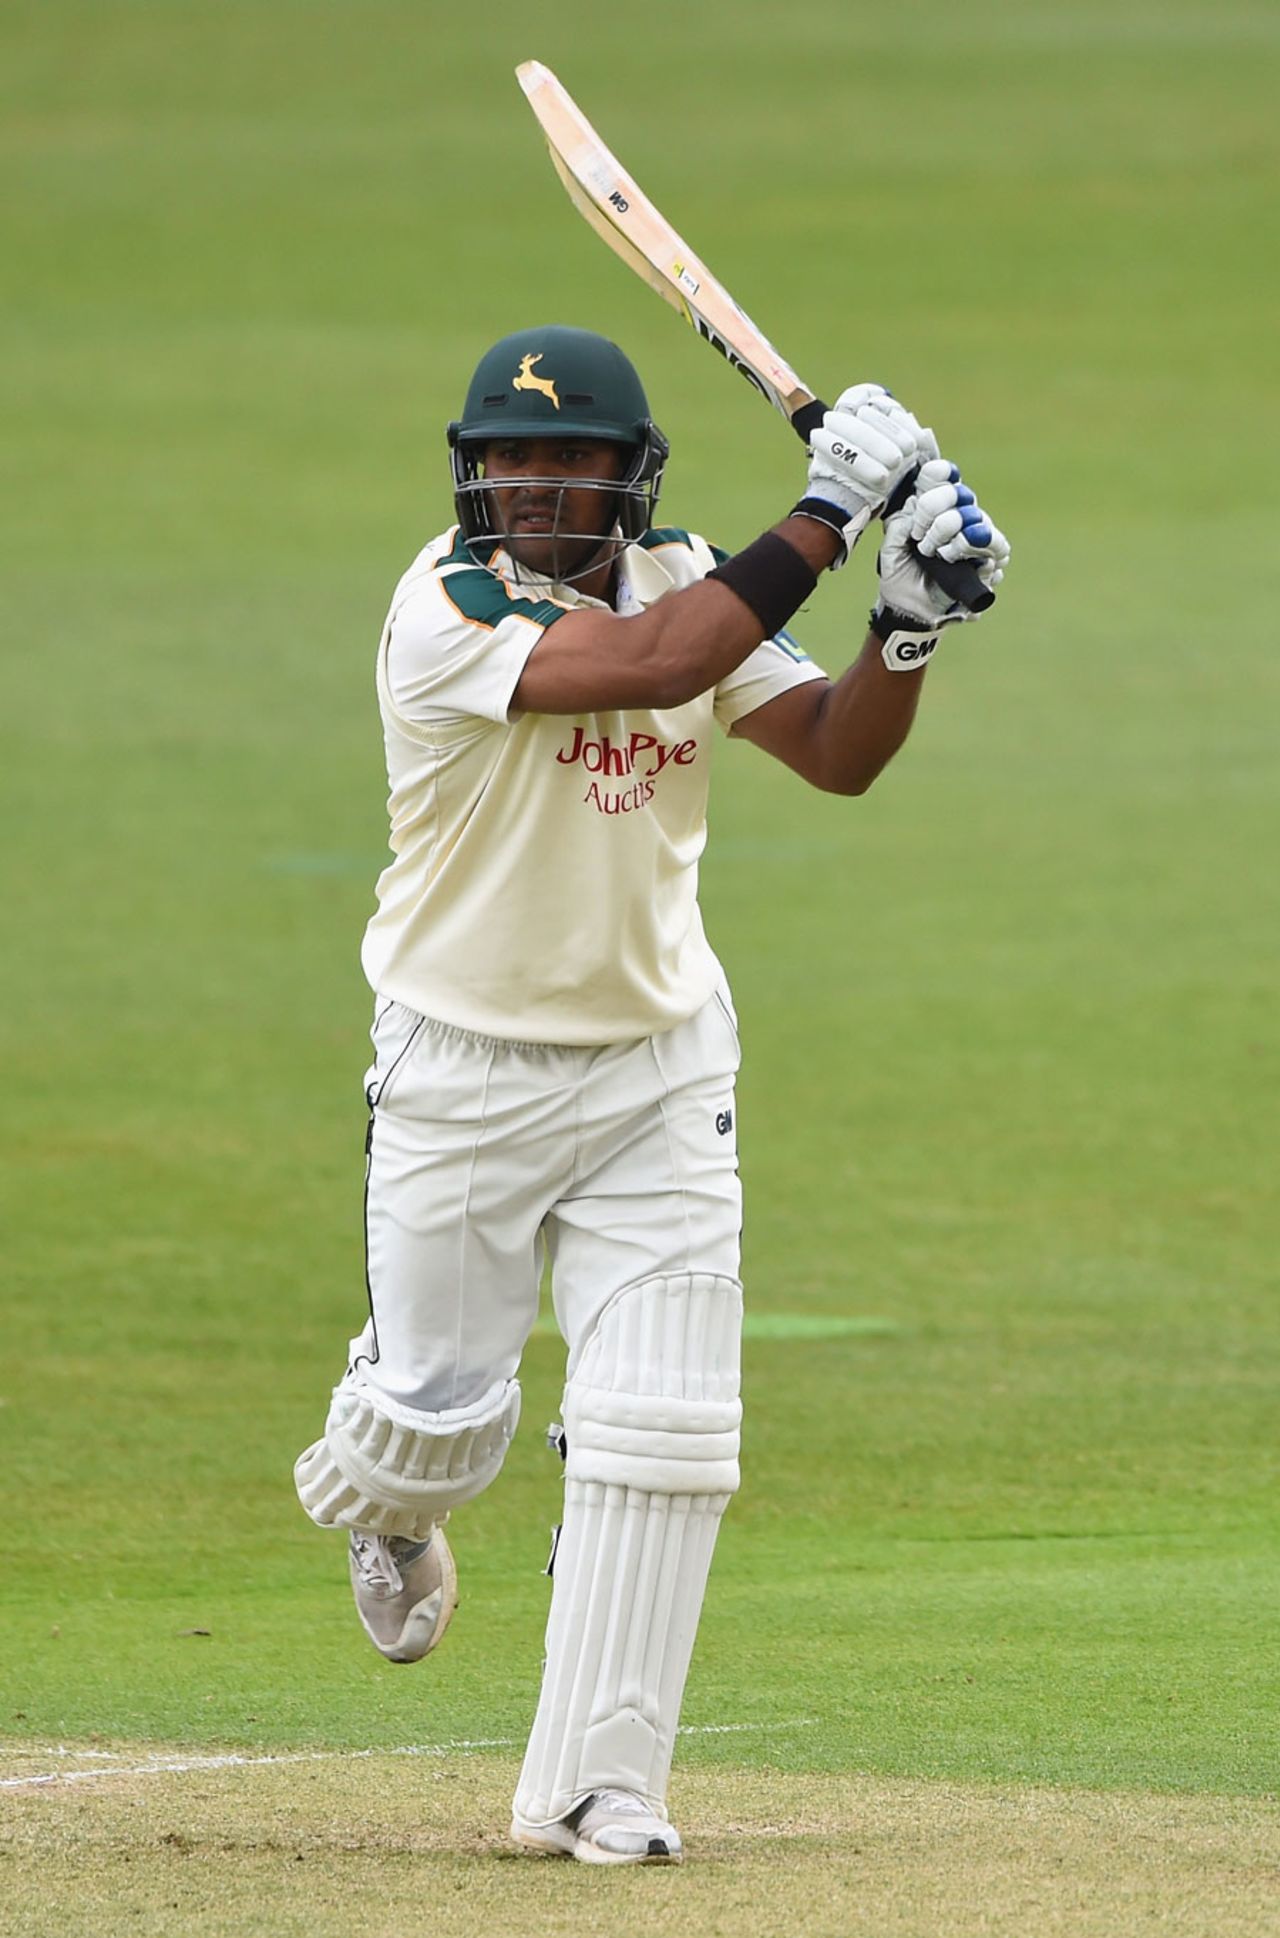 Samit Patel was last man out for 56, Nottinghamshire v Somerset, County Championship, Division One, Trent Bridge, 3rd day, May 19, 2015